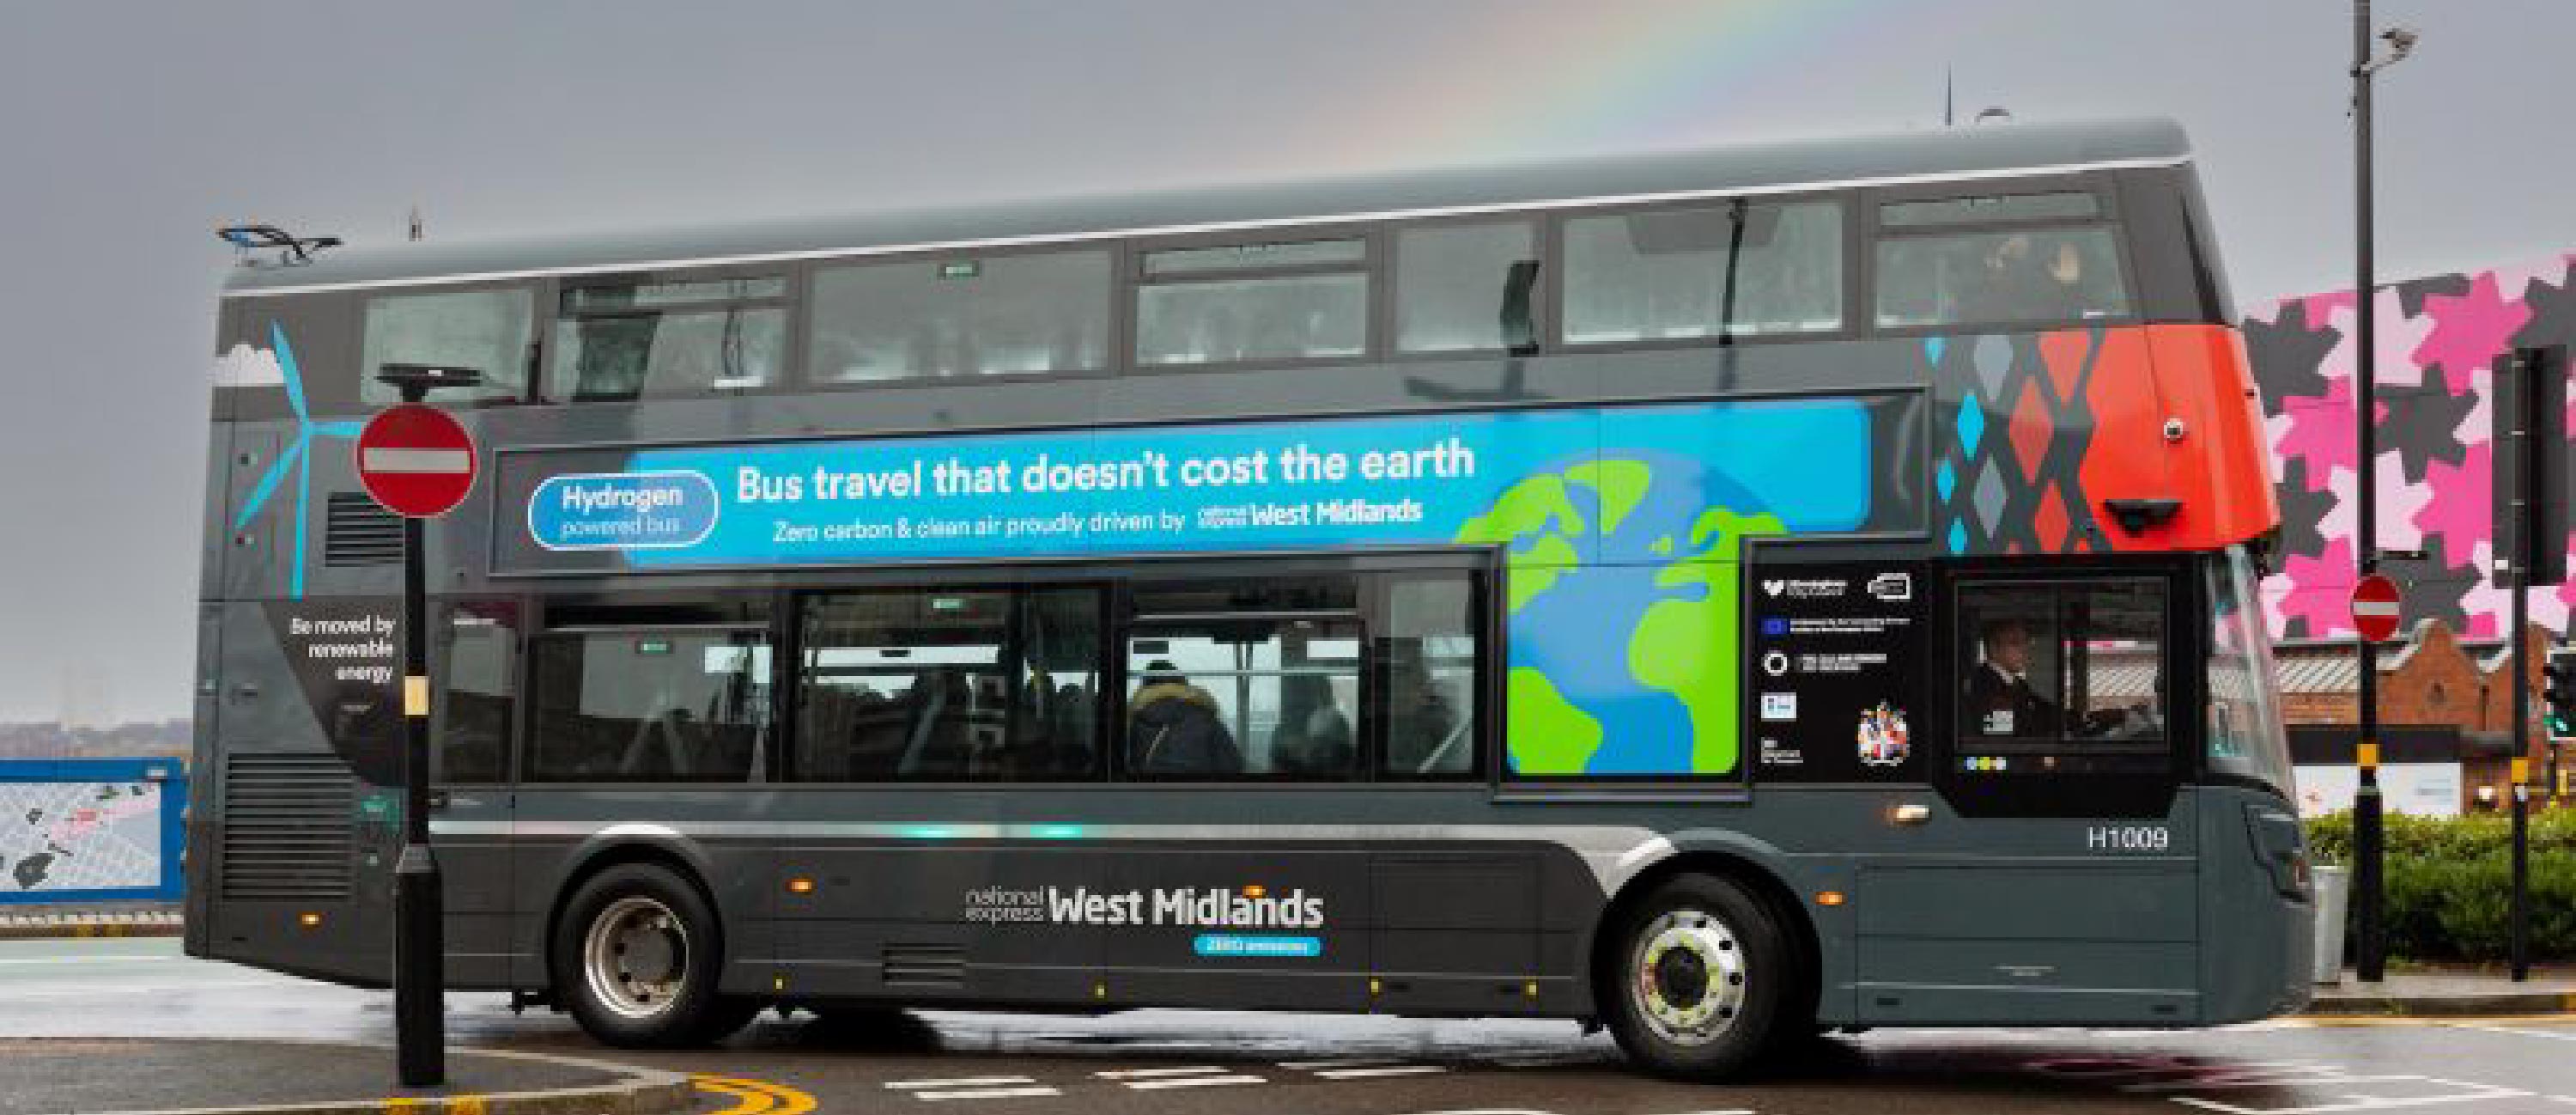 Hydrogen-powered buses on the streets of the West Midlands for the first time. 